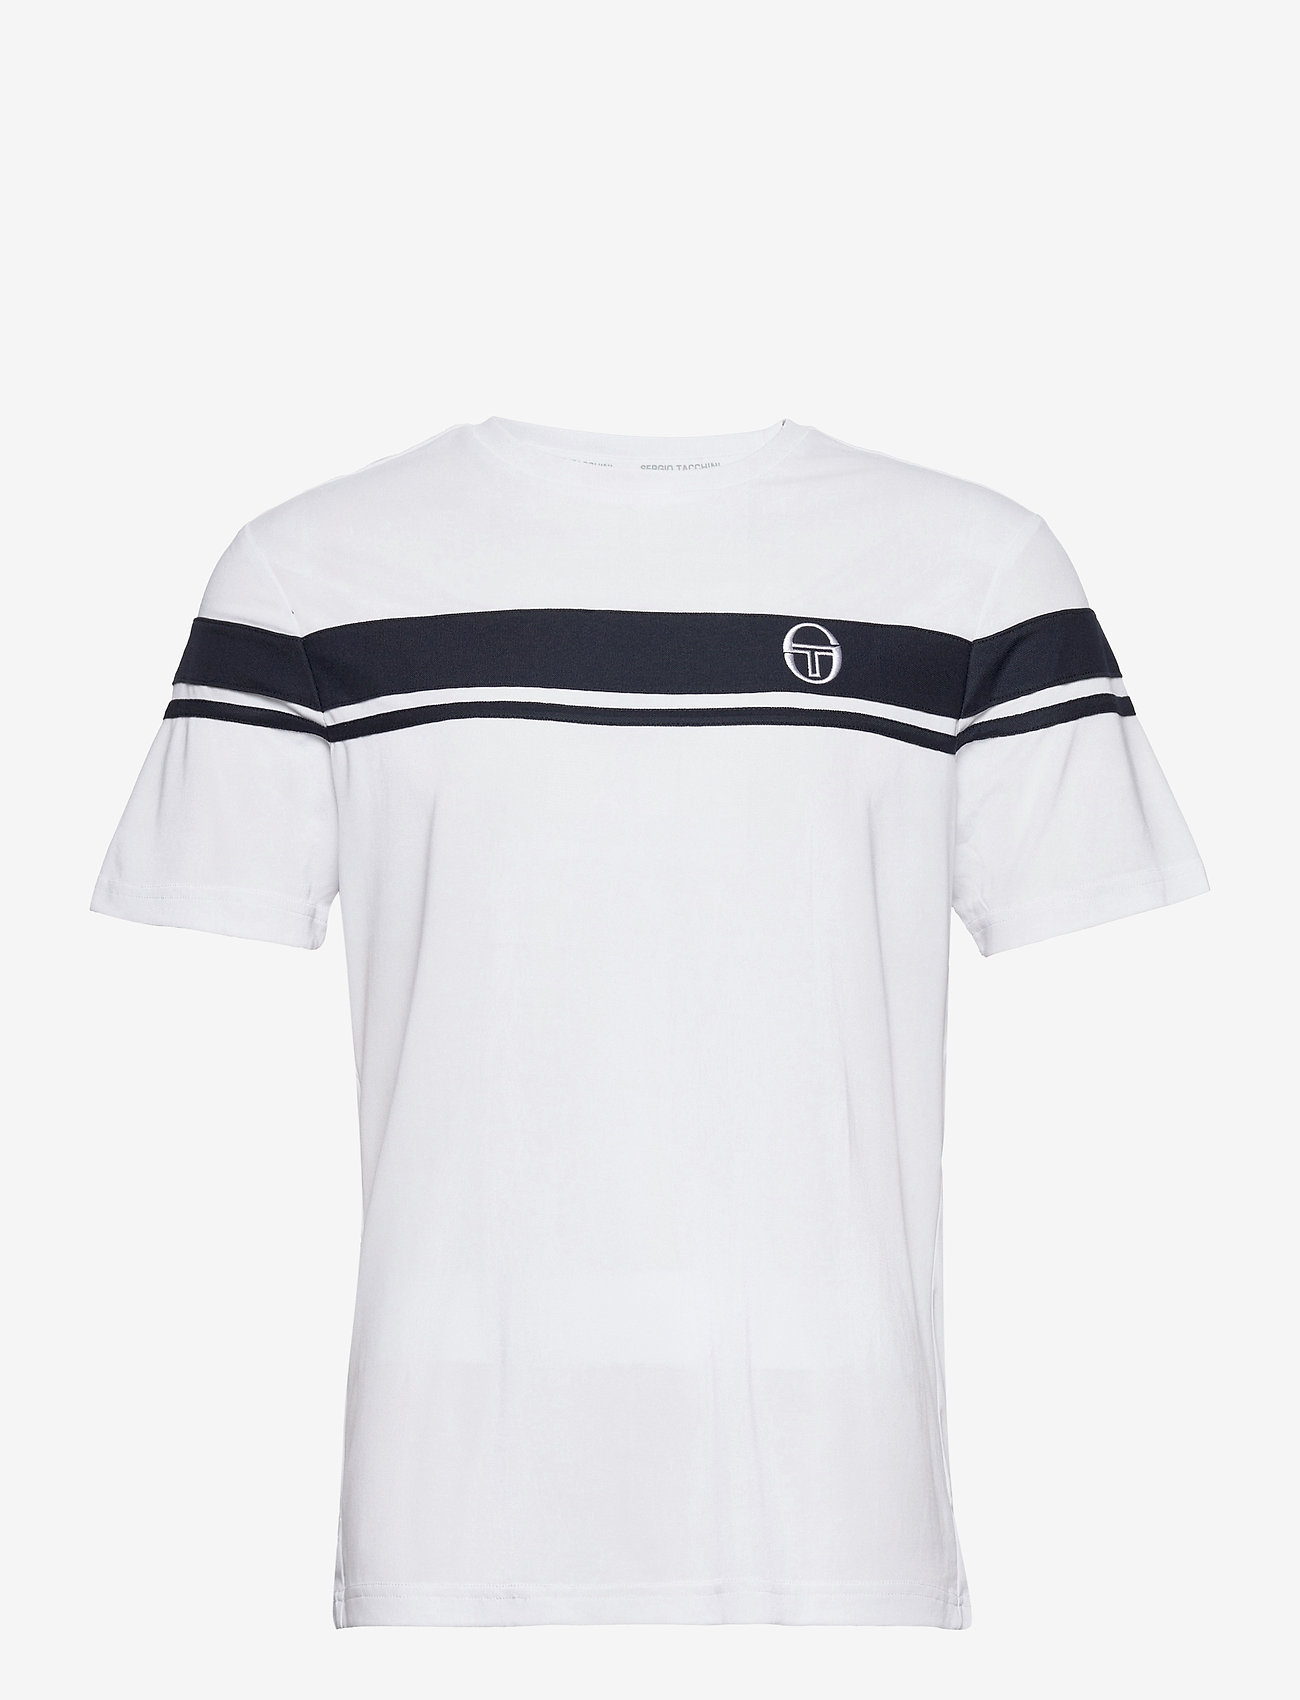 Sergio Tacchini - YOUNG LINE PRO T-SHIRT - short-sleeved t-shirts - white/navy - 0